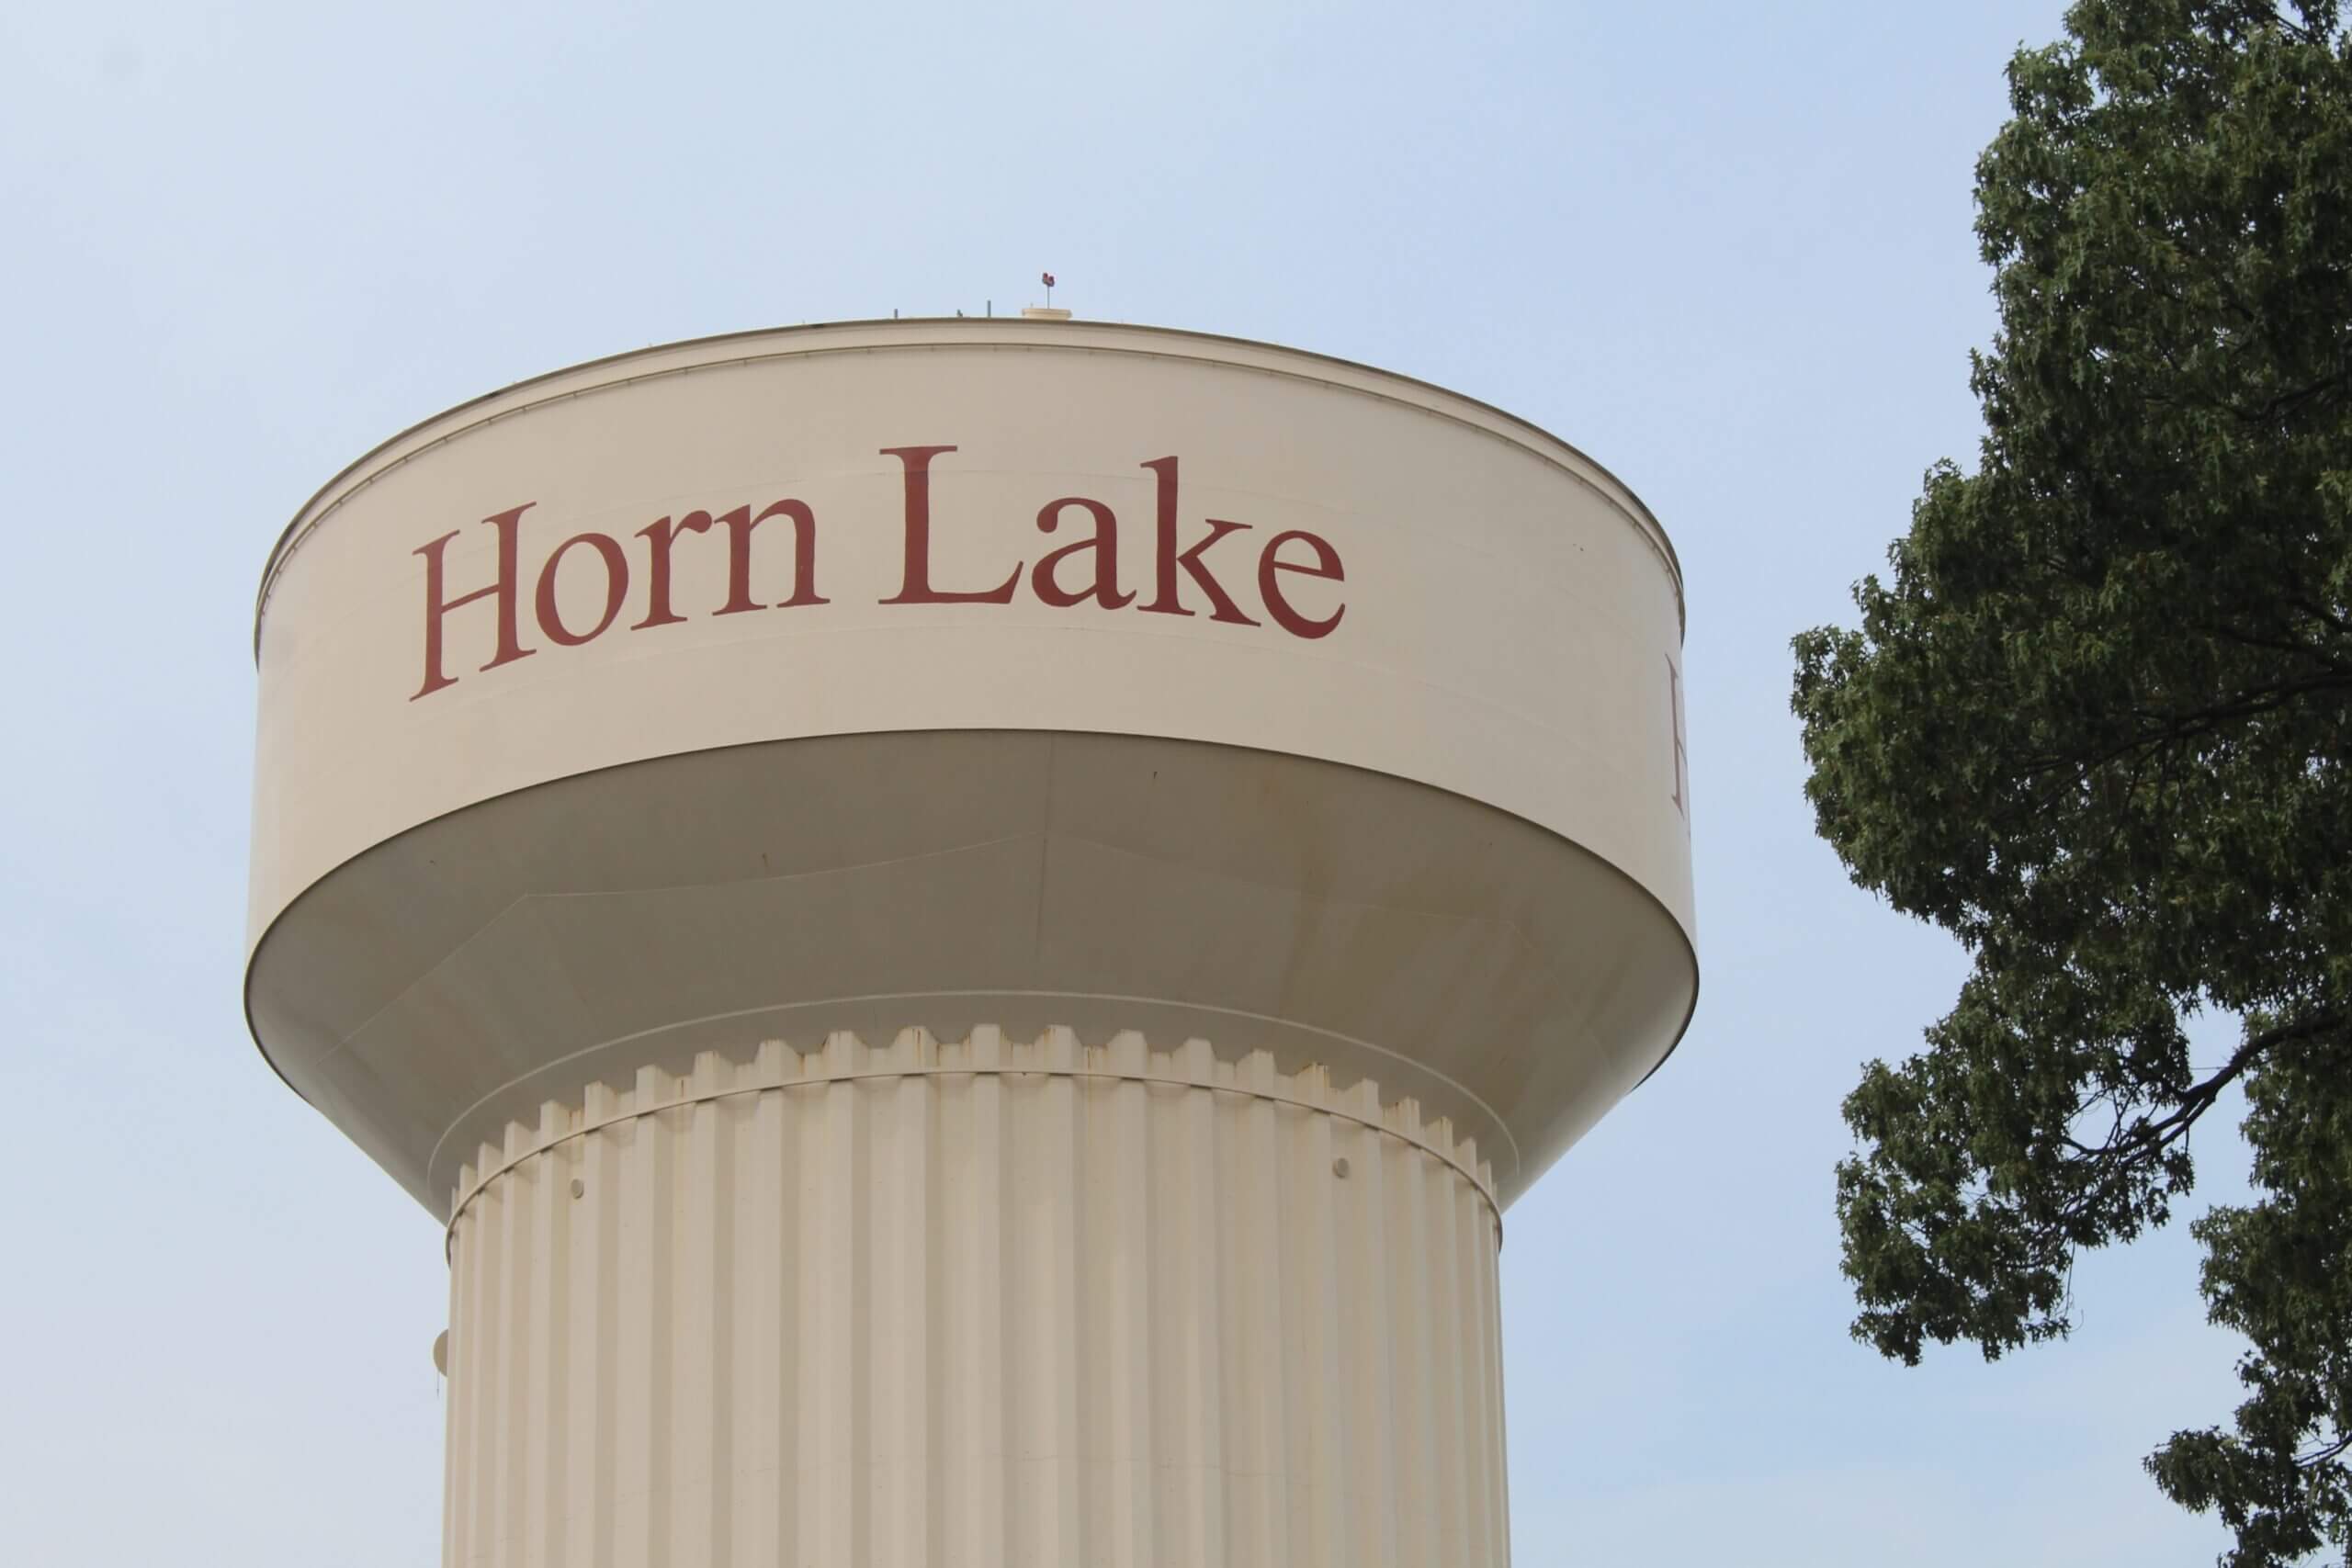 Mosque cemetery plan gets Horn Lake board approval